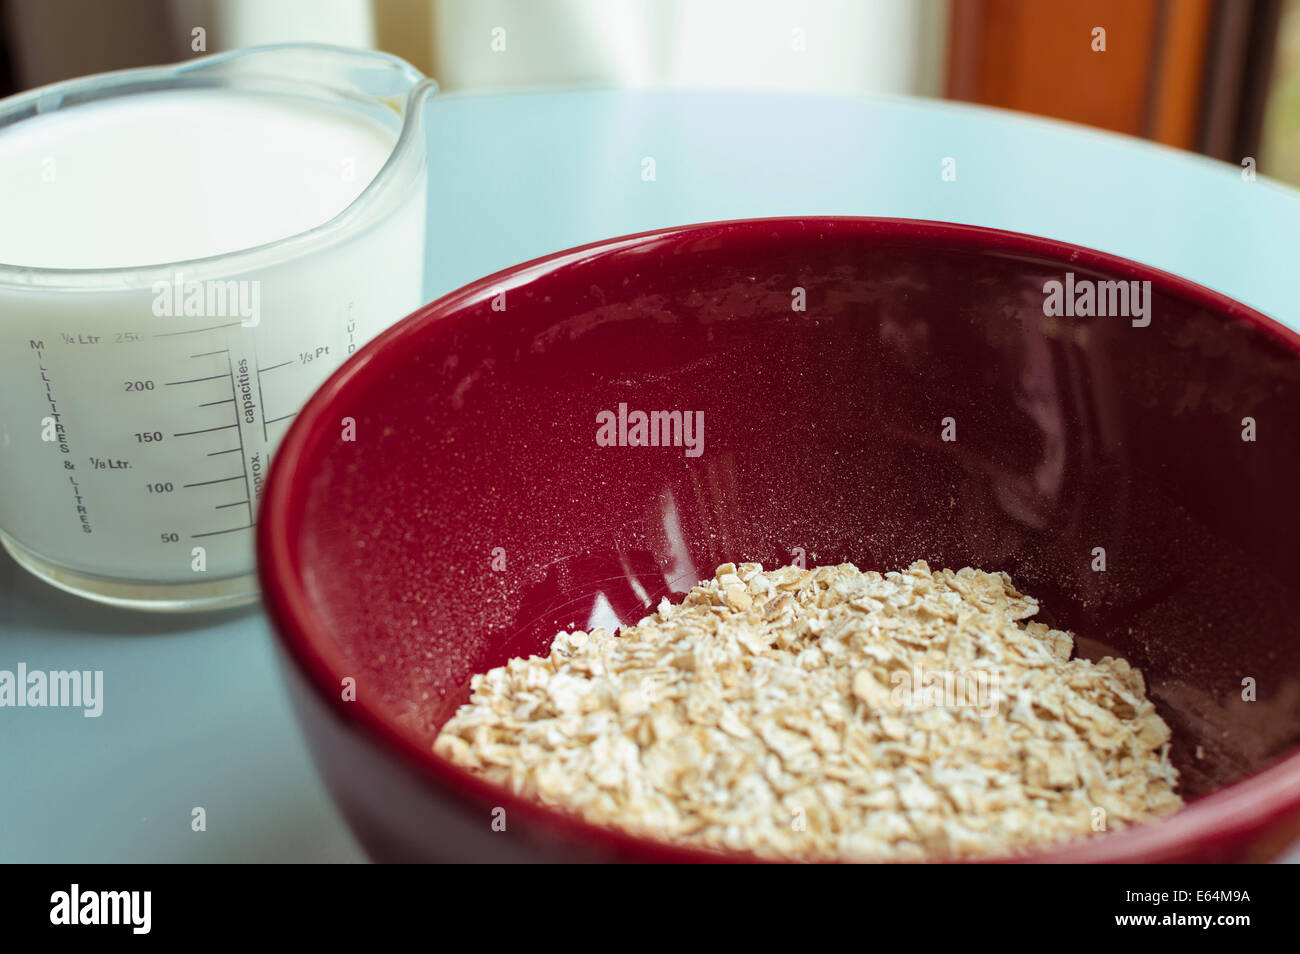 porridge oats in a red bowl; milk-filled measuring jug in the background on a blue table-top. Stock Photo